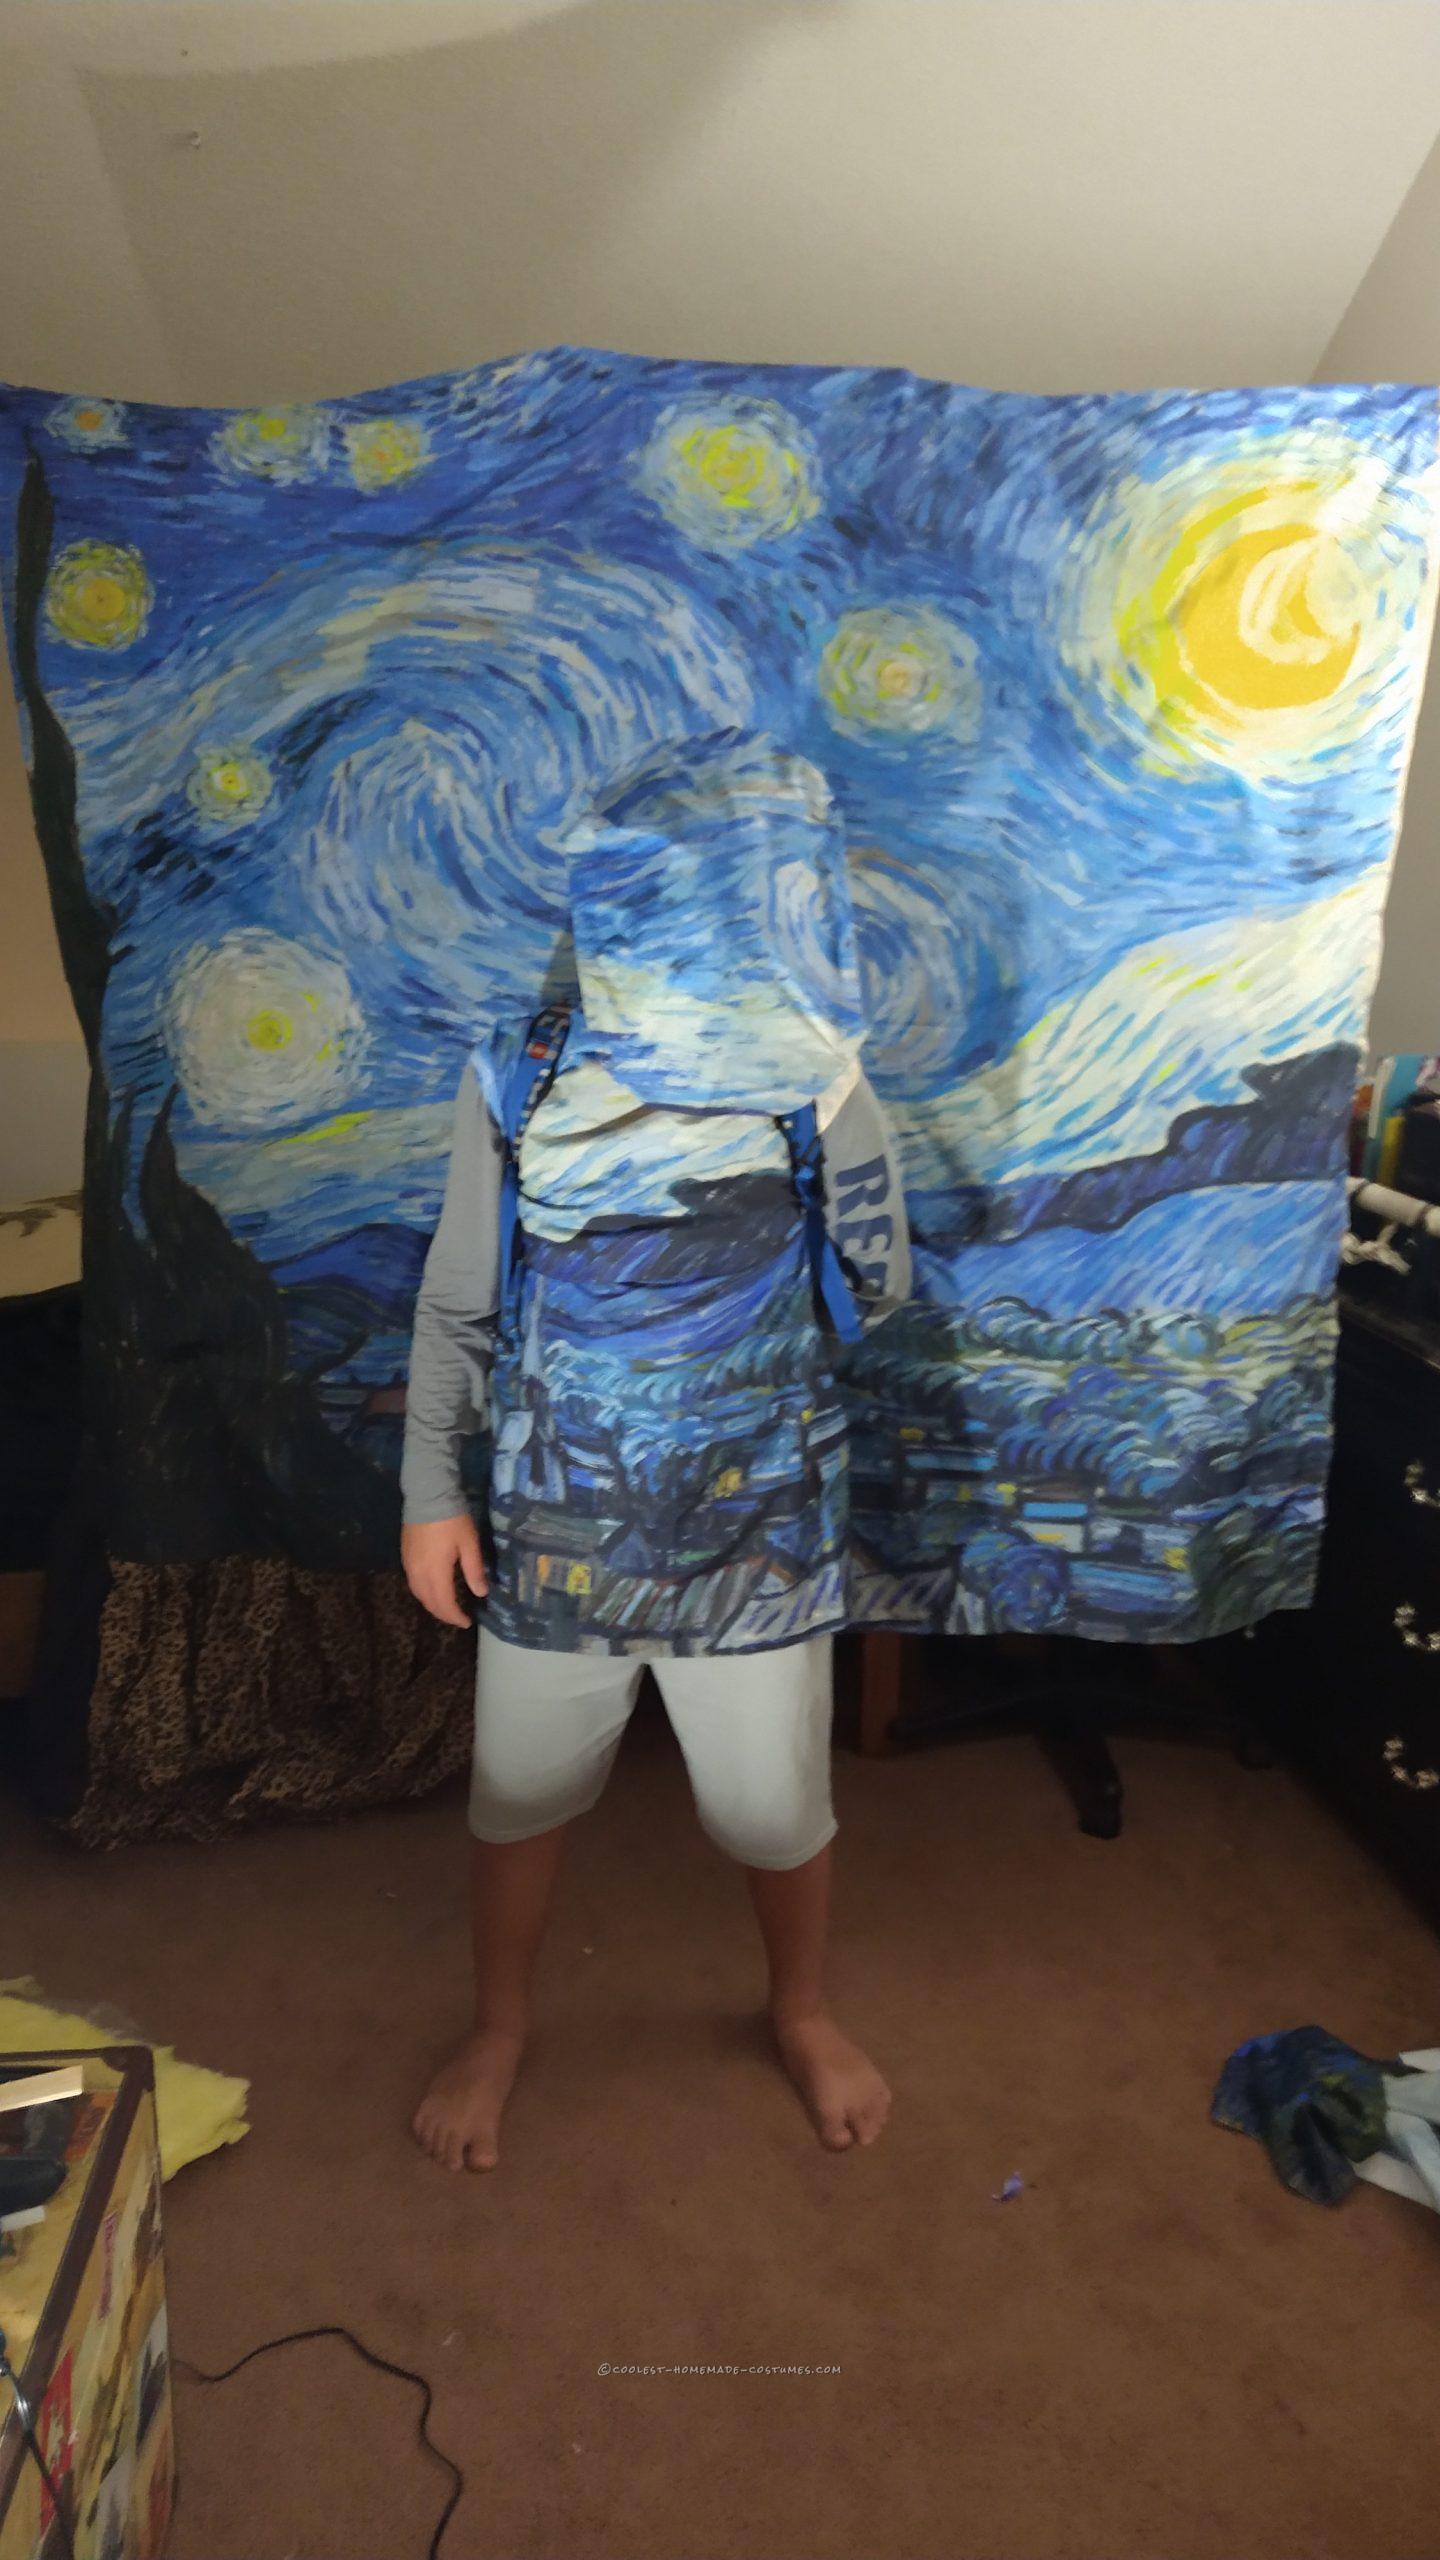 Ladies and gentlemen..  I give you.. "Starry Night"